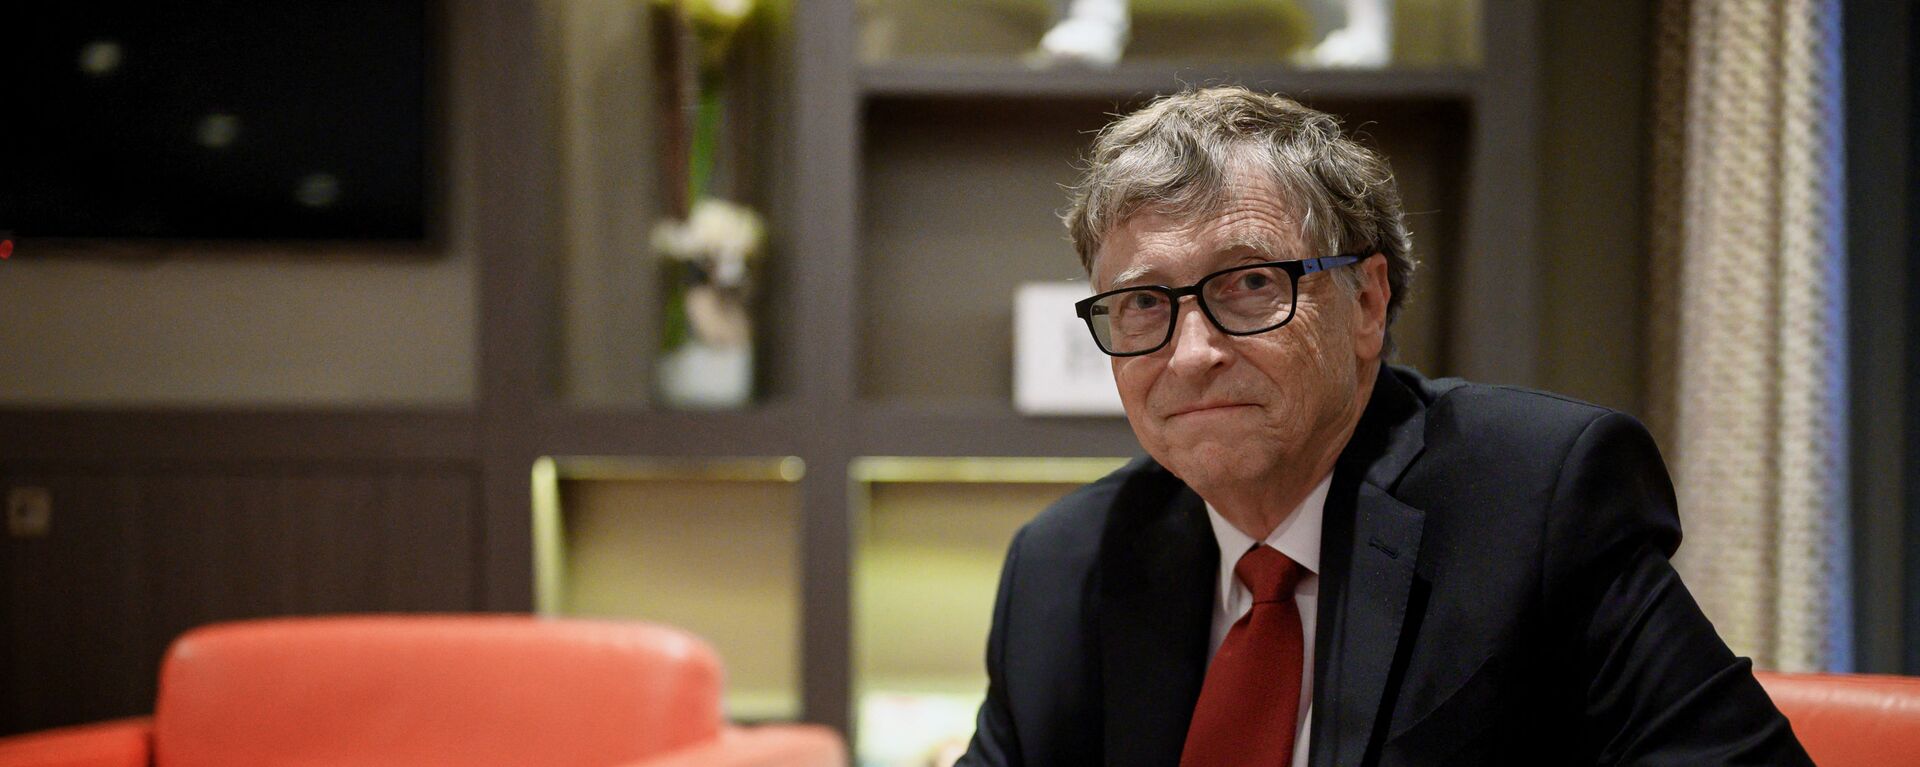 US Microsoft founder, Co-Chairman of the Bill & Melinda Gates Foundation, Bill Gates, poses for a picture on October 9, 2019, in Lyon, central eastern France, during the funding conference of Global Fund to Fight AIDS, Tuberculosis and Malaria.  - Sputnik International, 1920, 30.01.2023